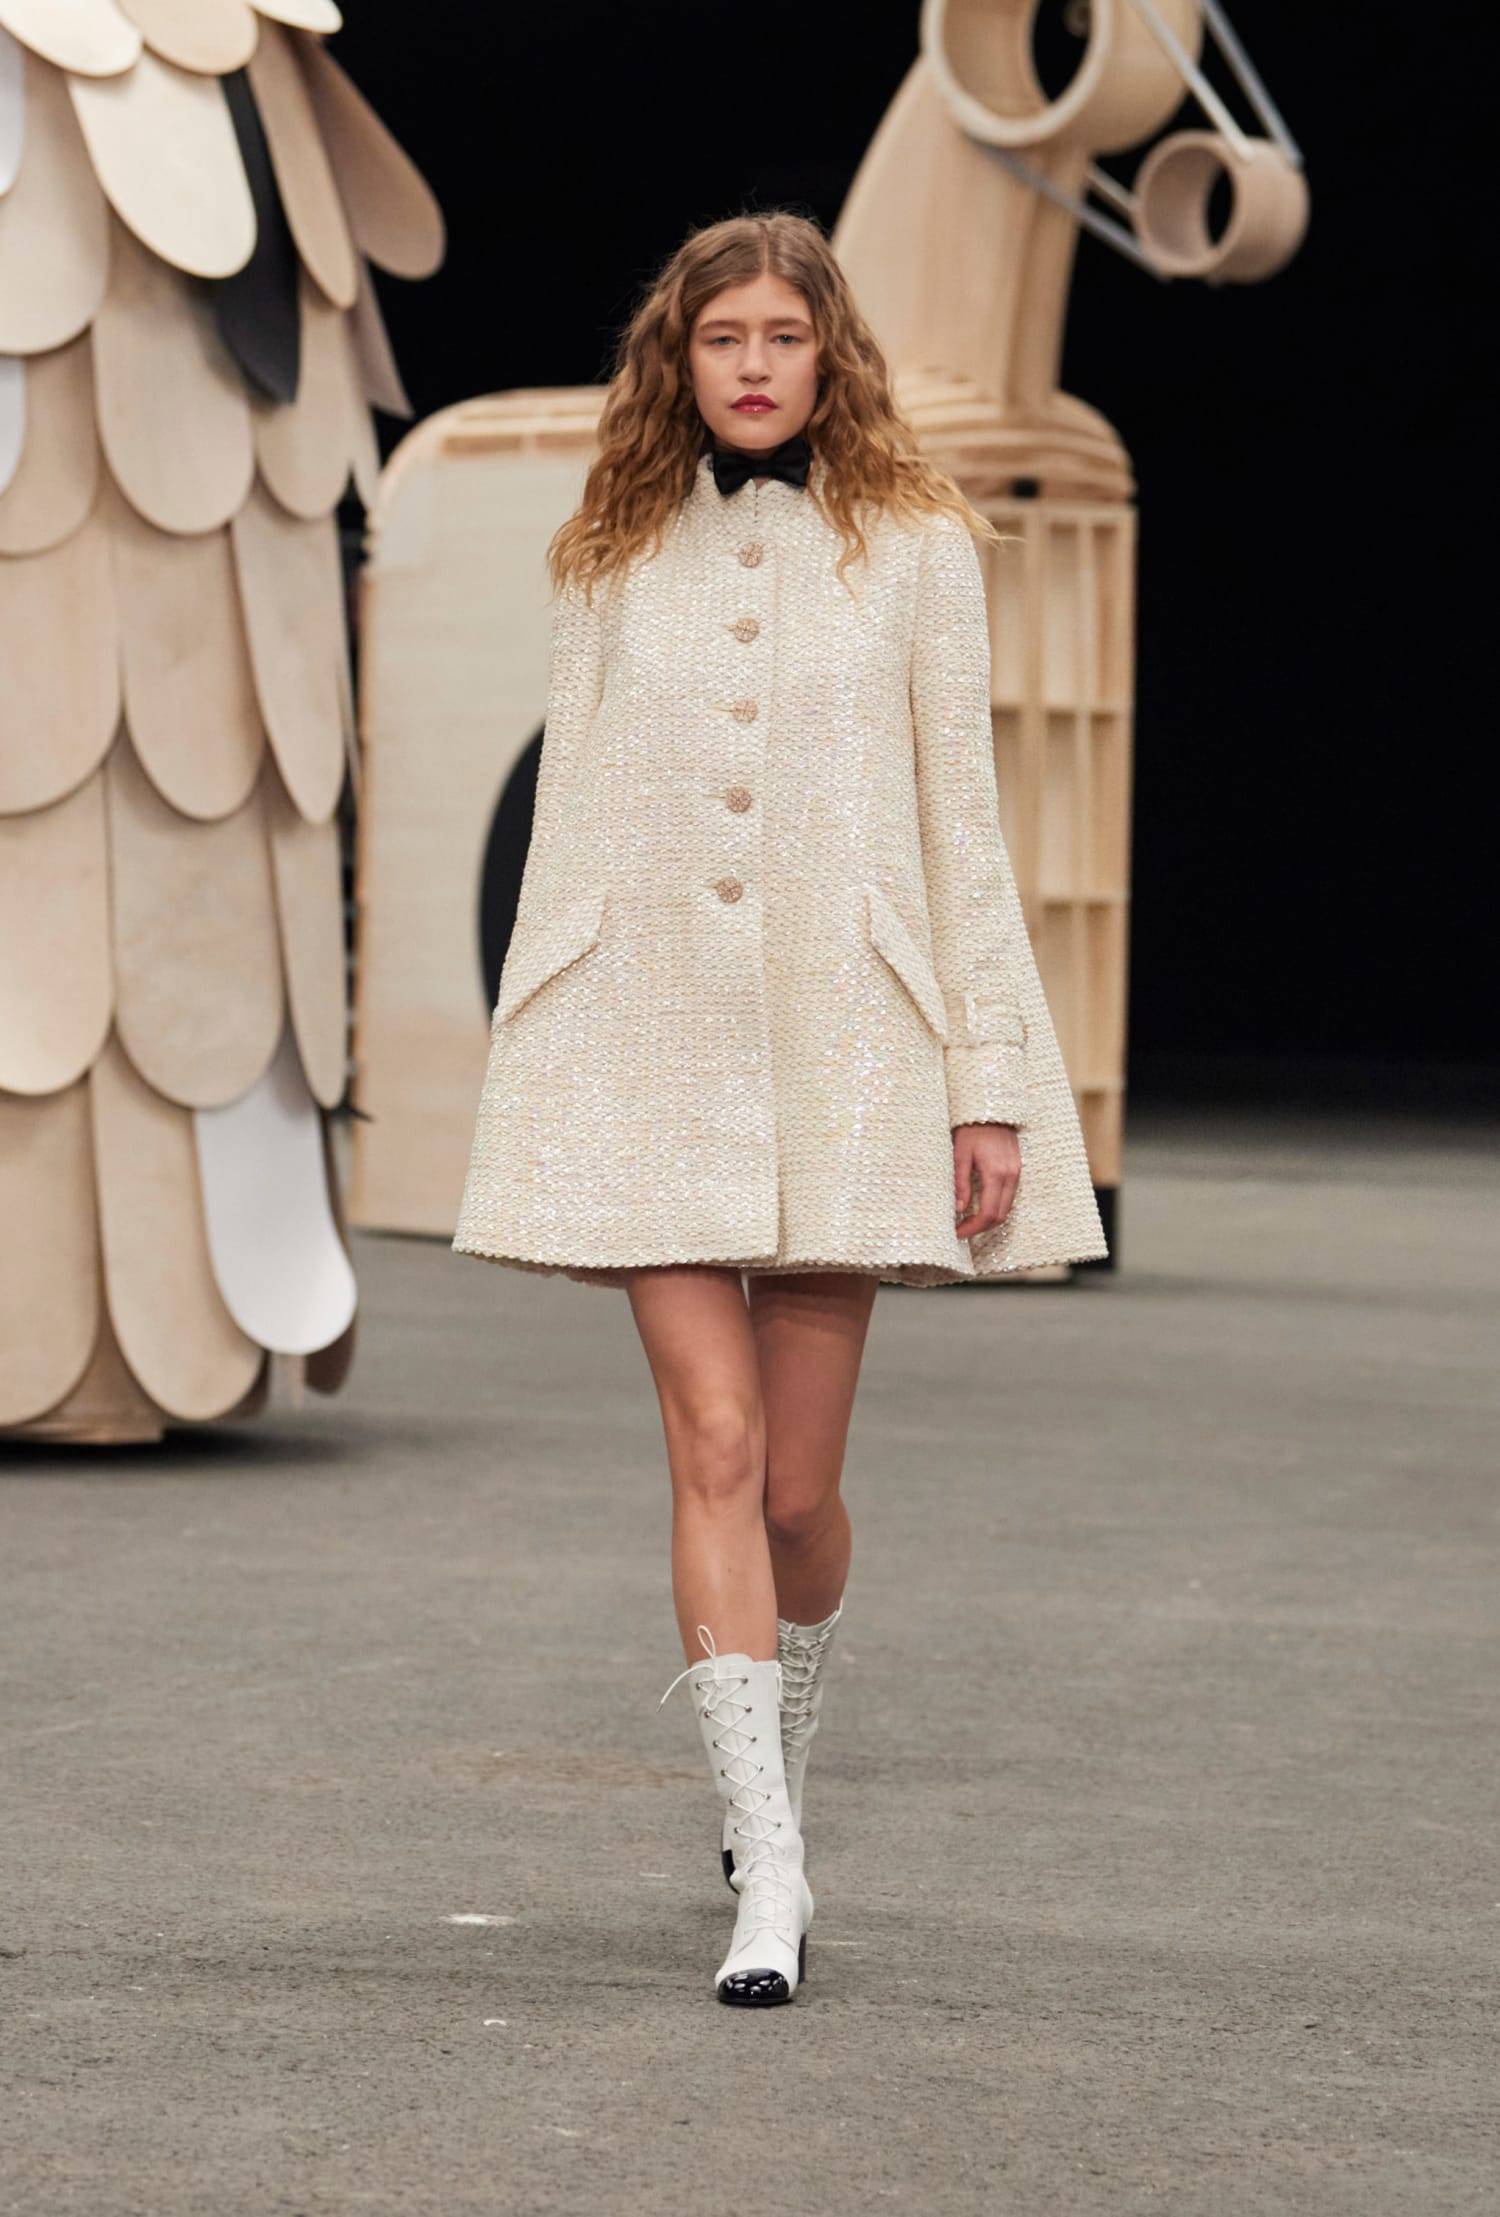 The spectacular parade at the Chanel couture show